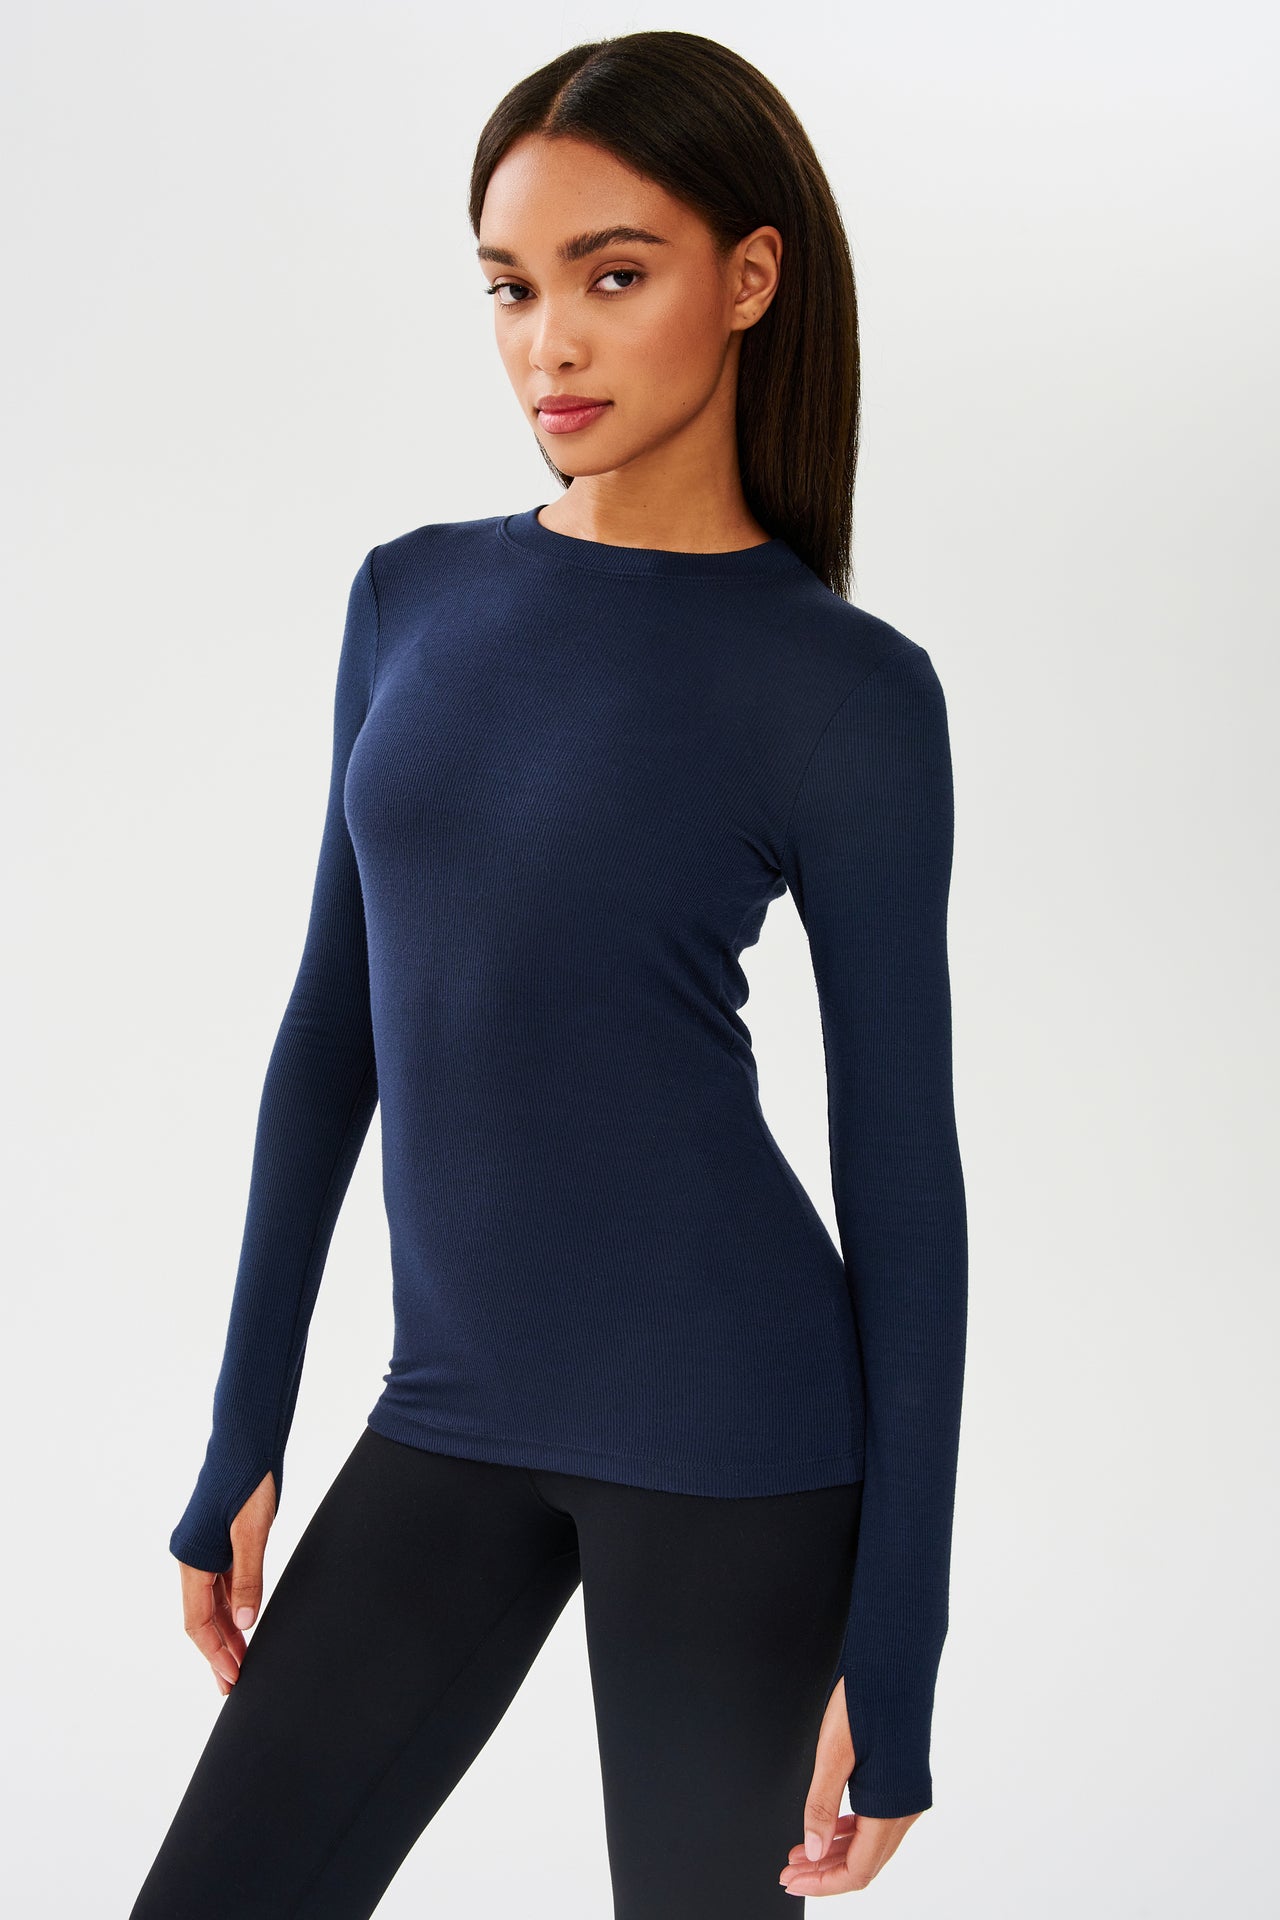 A woman in a blue Louise Rib Long Sleeve from SPLITS59 doing yoga.